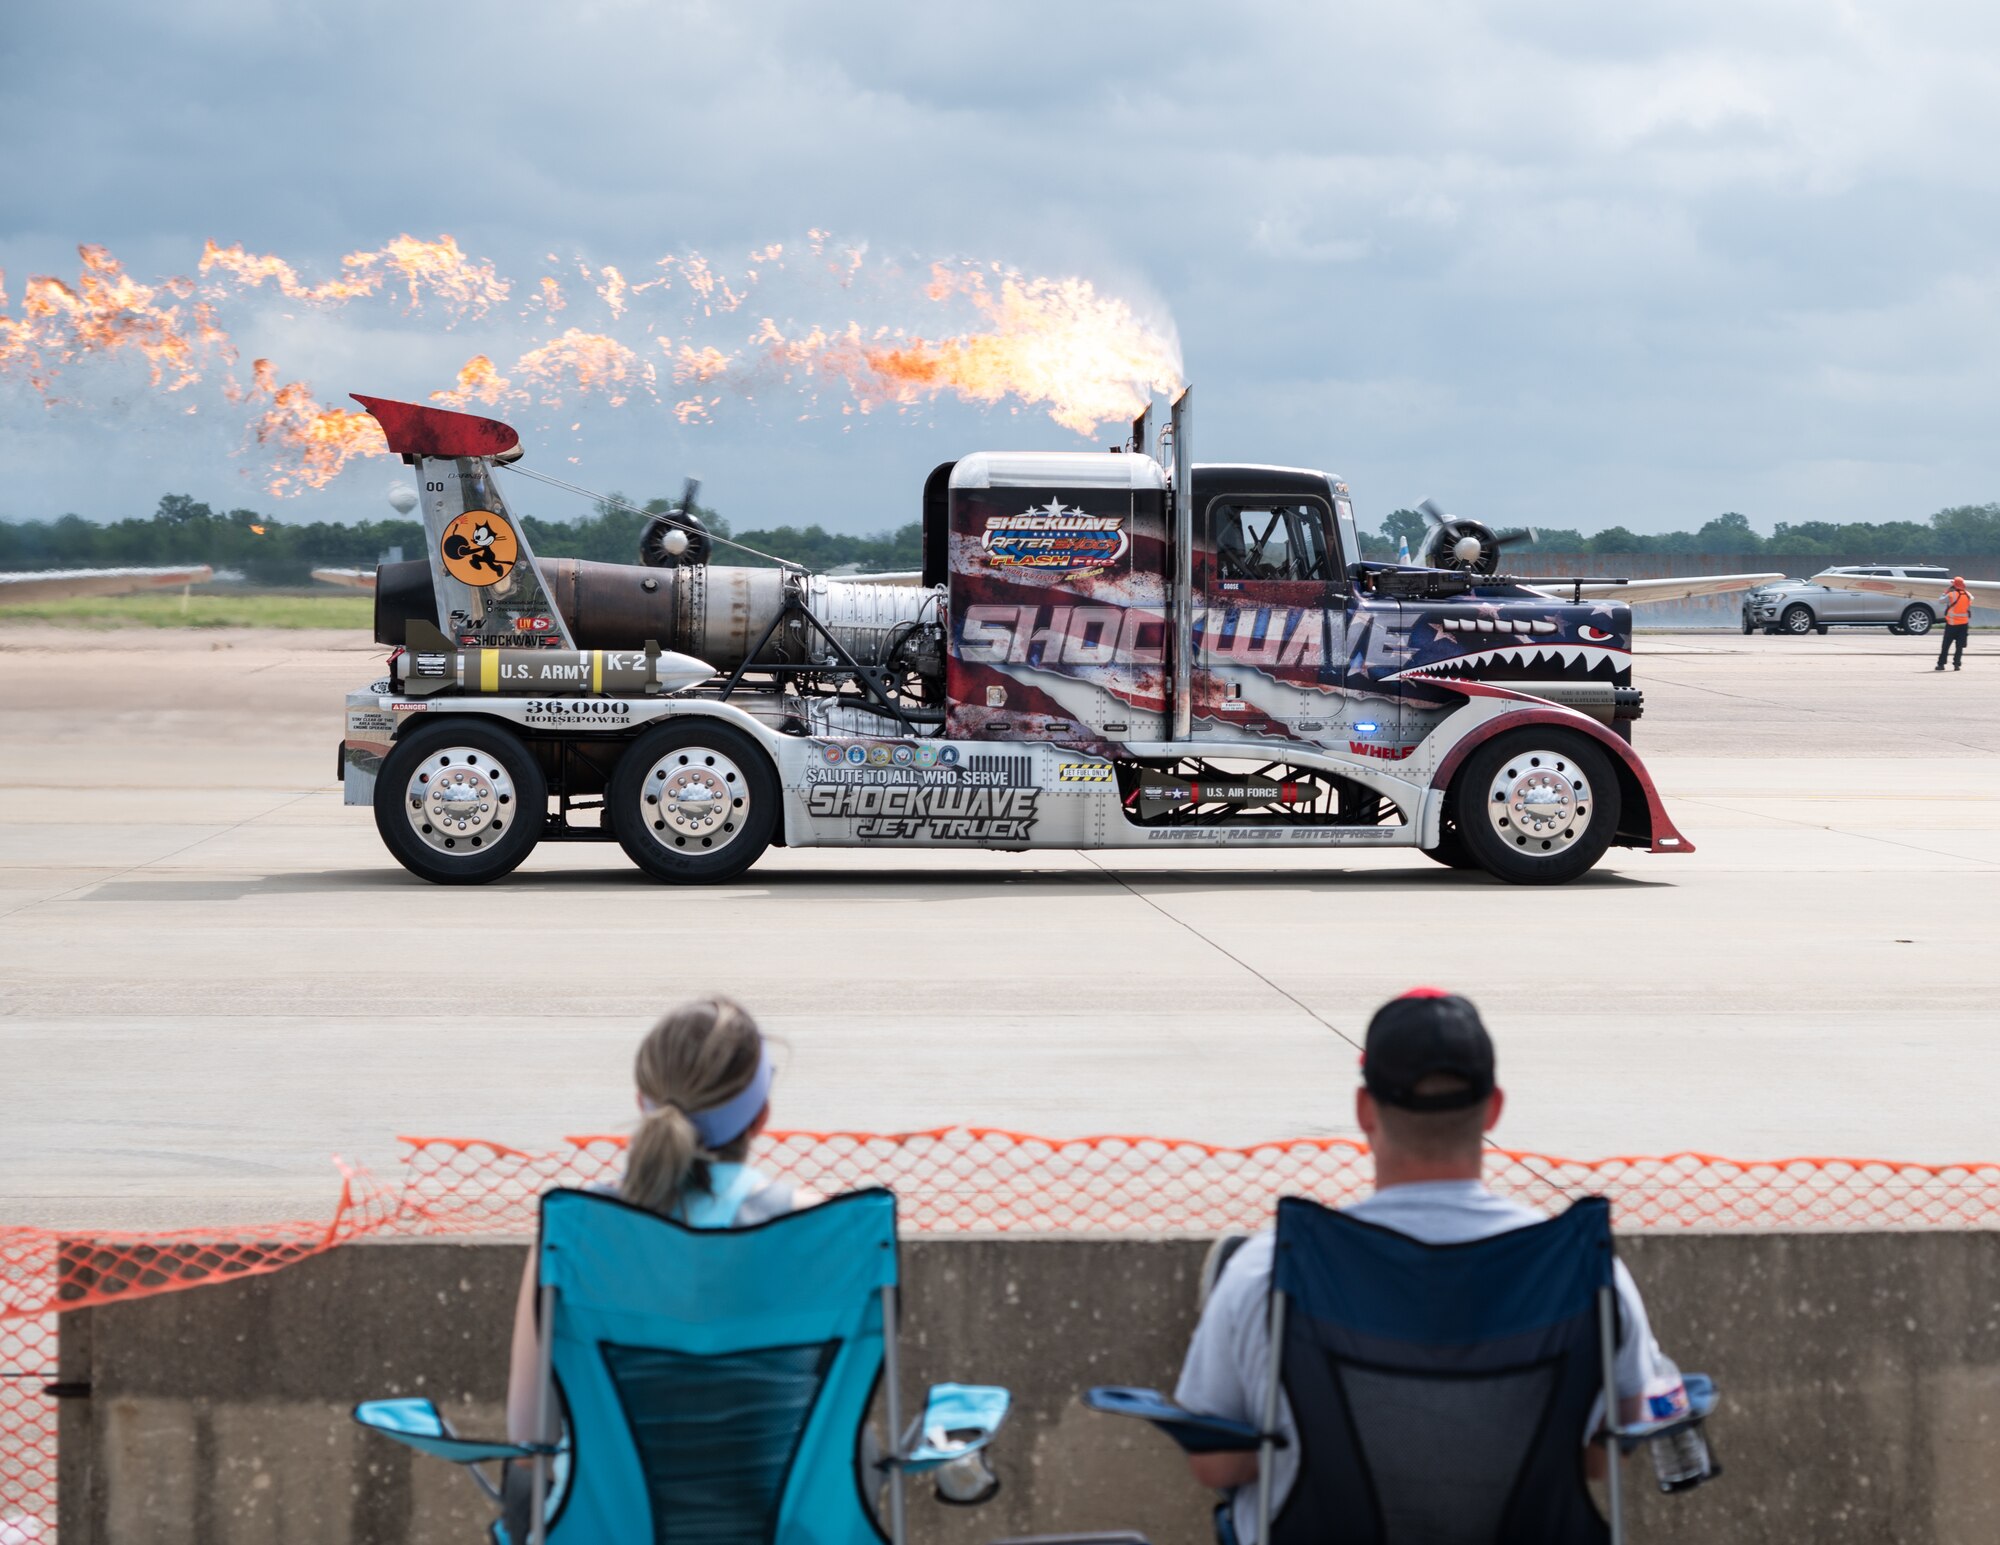 Spectators watch as the Shockwave Jet Truck performs a demonstration at the 2021 Defenders of Liberty Air & Space Show at Barksdale Air Force Base, Louisiana, May 9, 2021. The Barksdale Air Force Base Air & Space Show allows Shreveport-Bossier City to showcase the home of the B-52H Stratofortress, grant access to tour the military installation, view military and aerobatic performers, and support the recruiting arm of our armed forces. (U.S. Air Force photo by Airman 1st Class William Pugh)